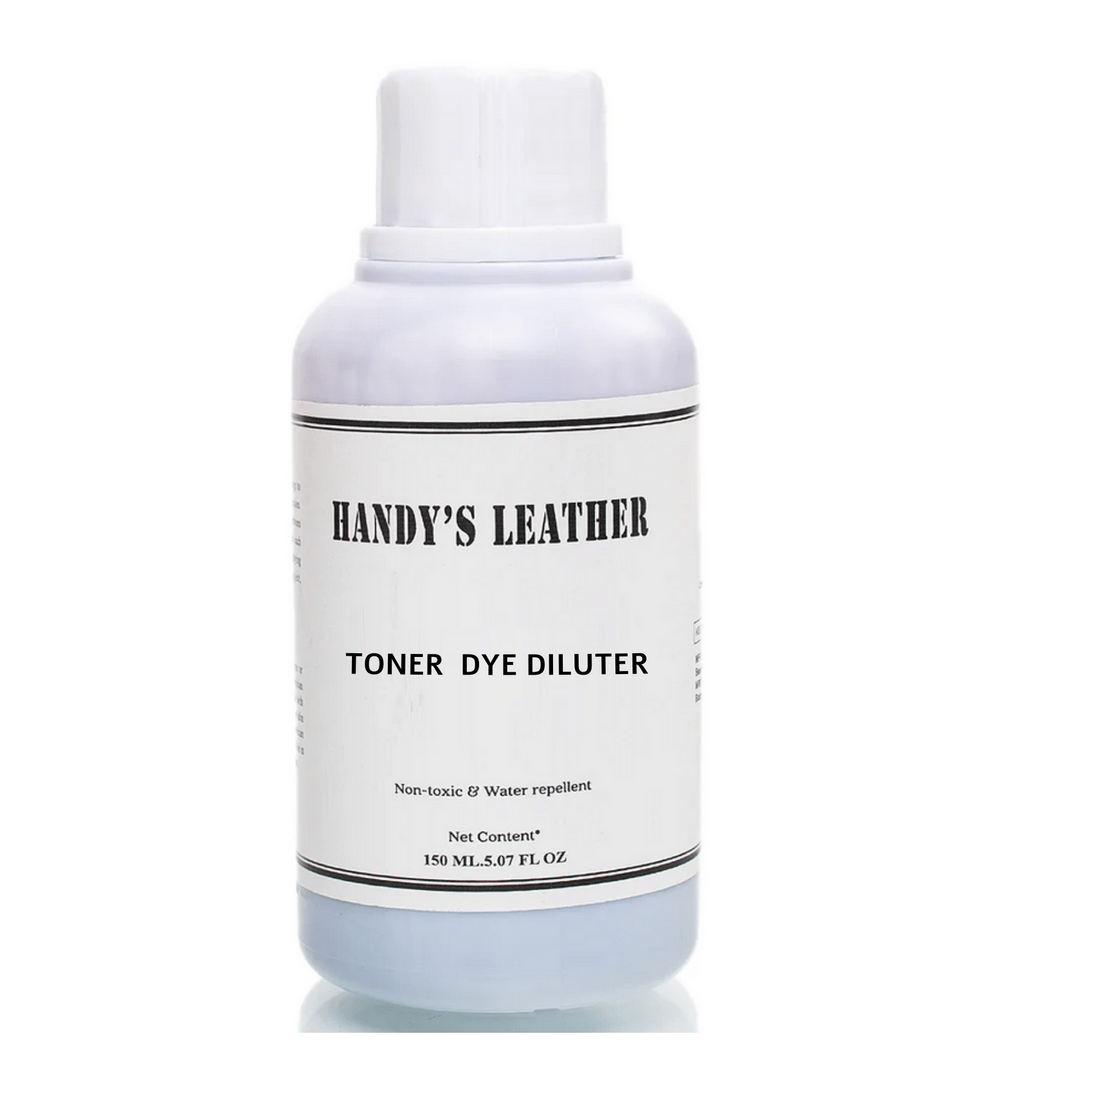 Toner (Alcohal) Leather Dye Diluter